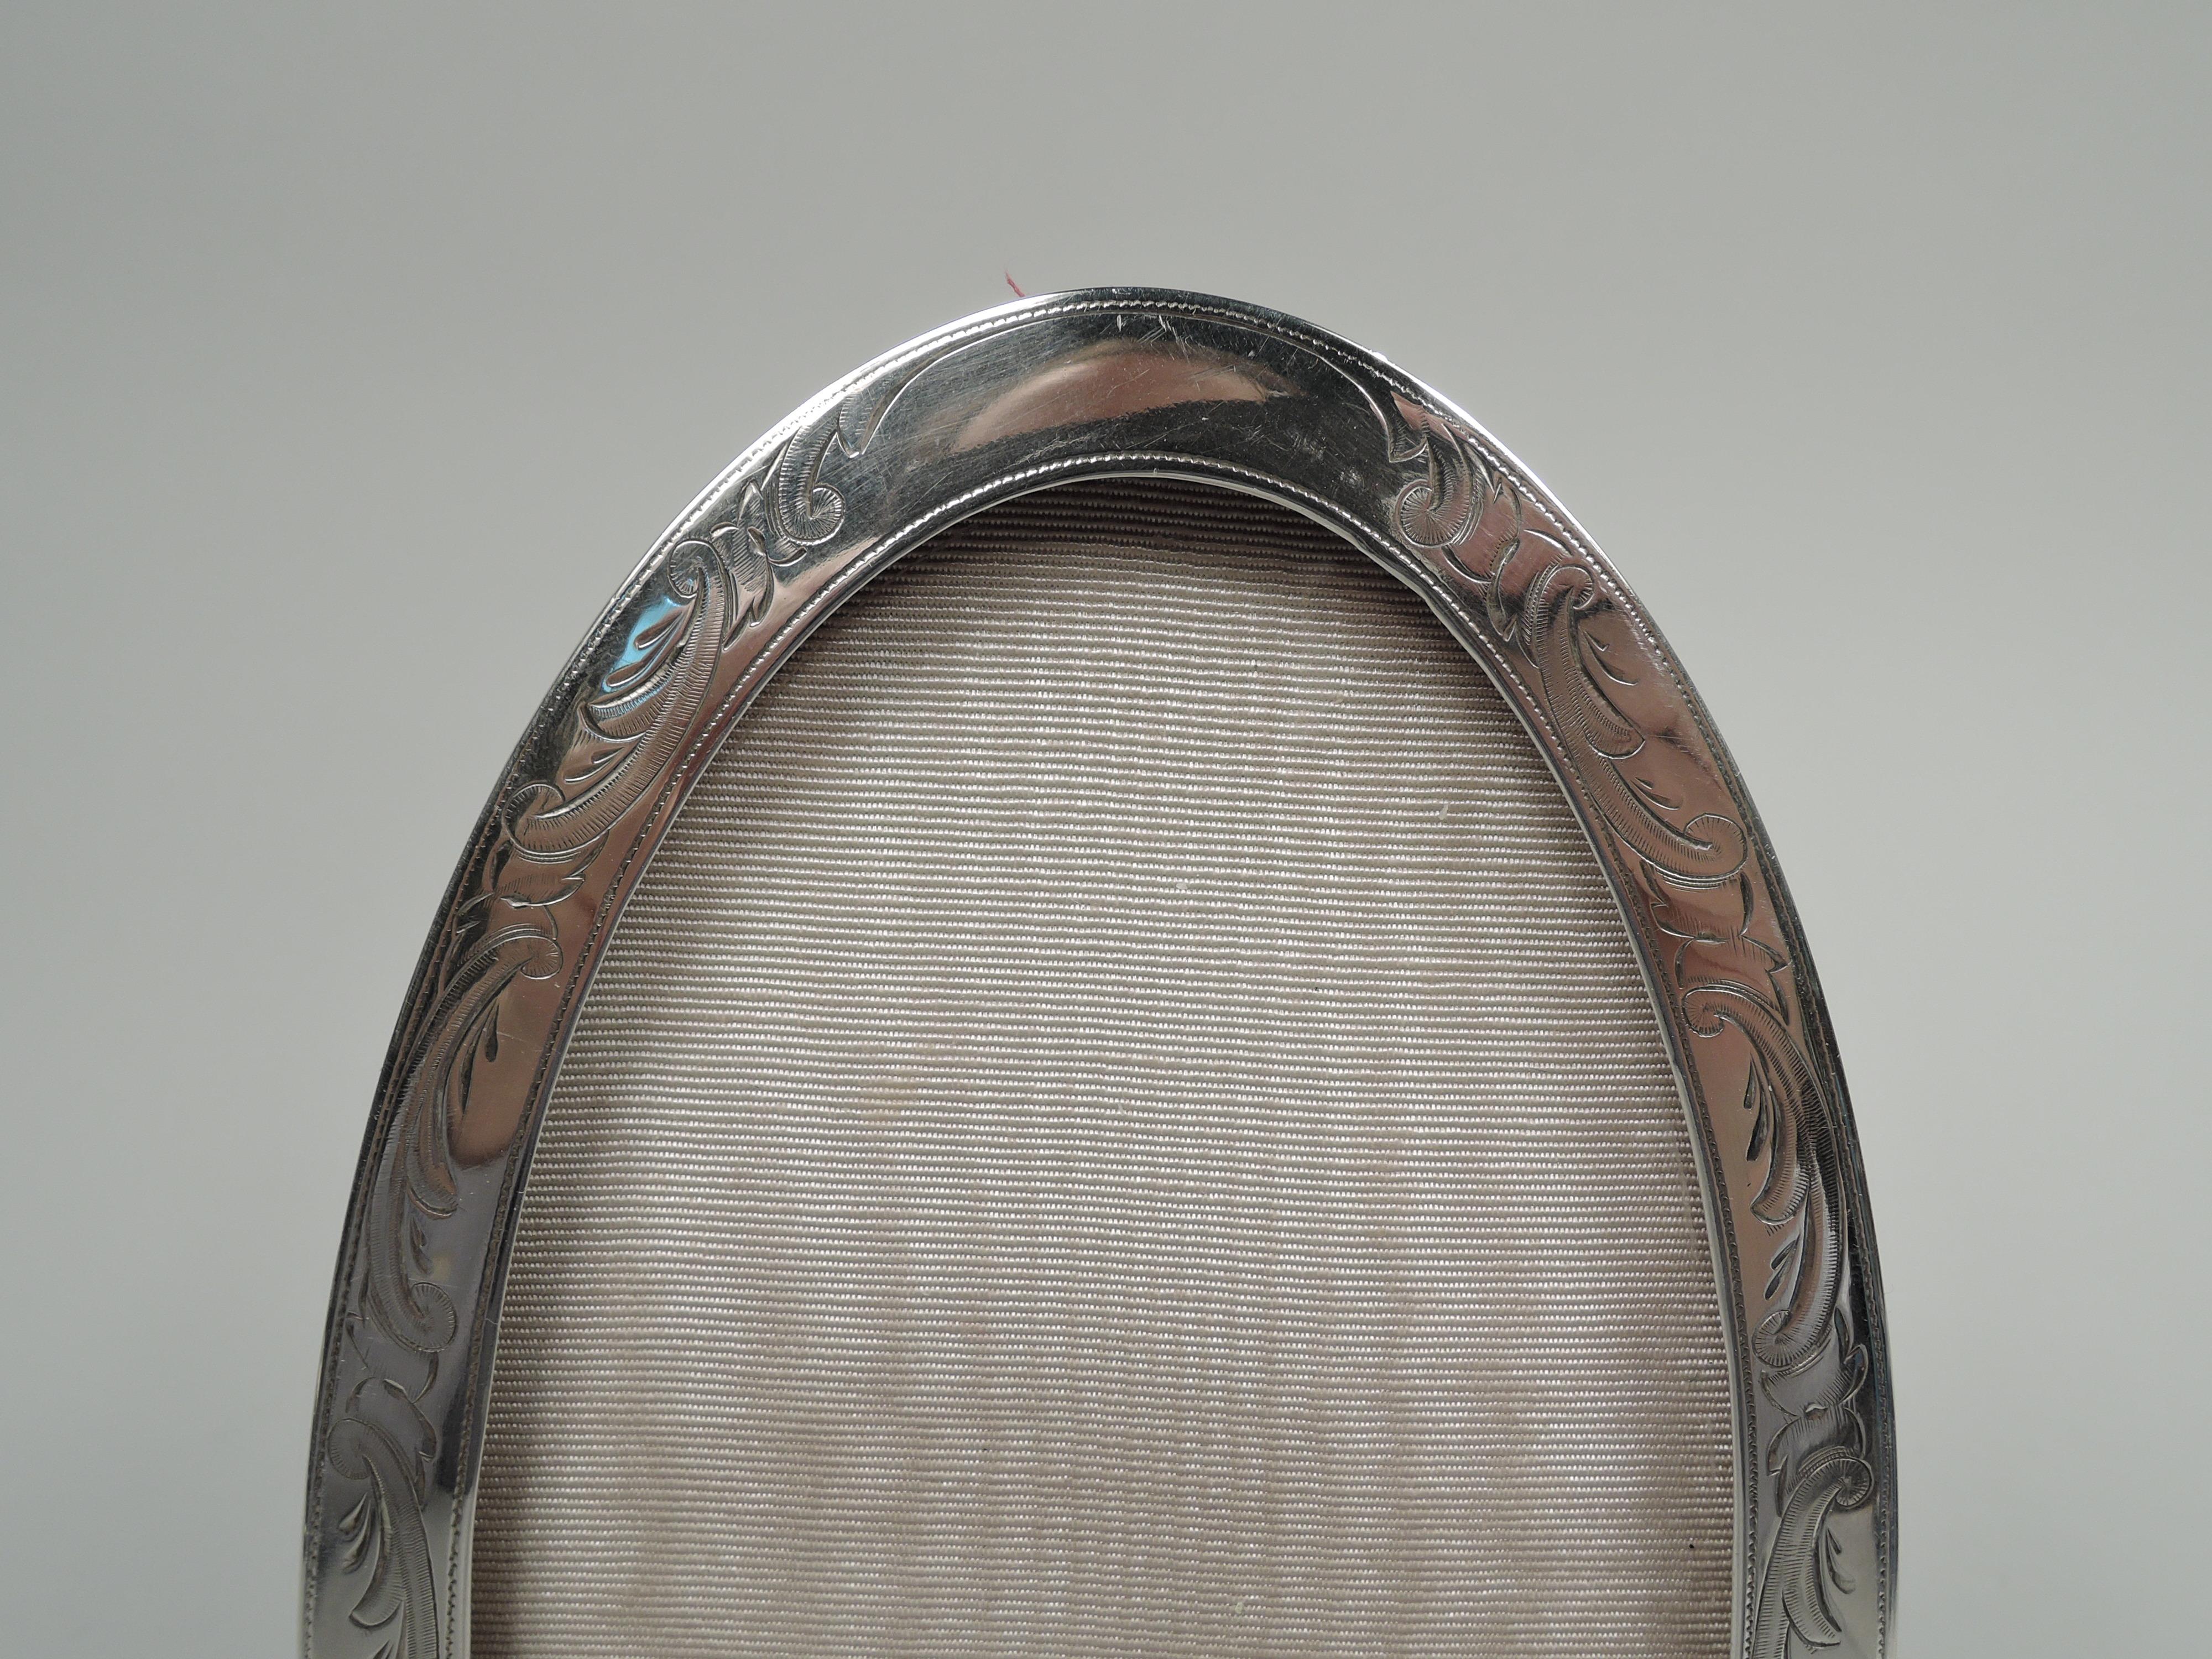 Edwardian Classical sterling silver picture frame. Made by Mauser in New York, circa 1900. Oval window in flat surround on open triangular supports. Engraved leafing scrolls and pendant flowers, and pointillé borders. With glass, silk lining, and